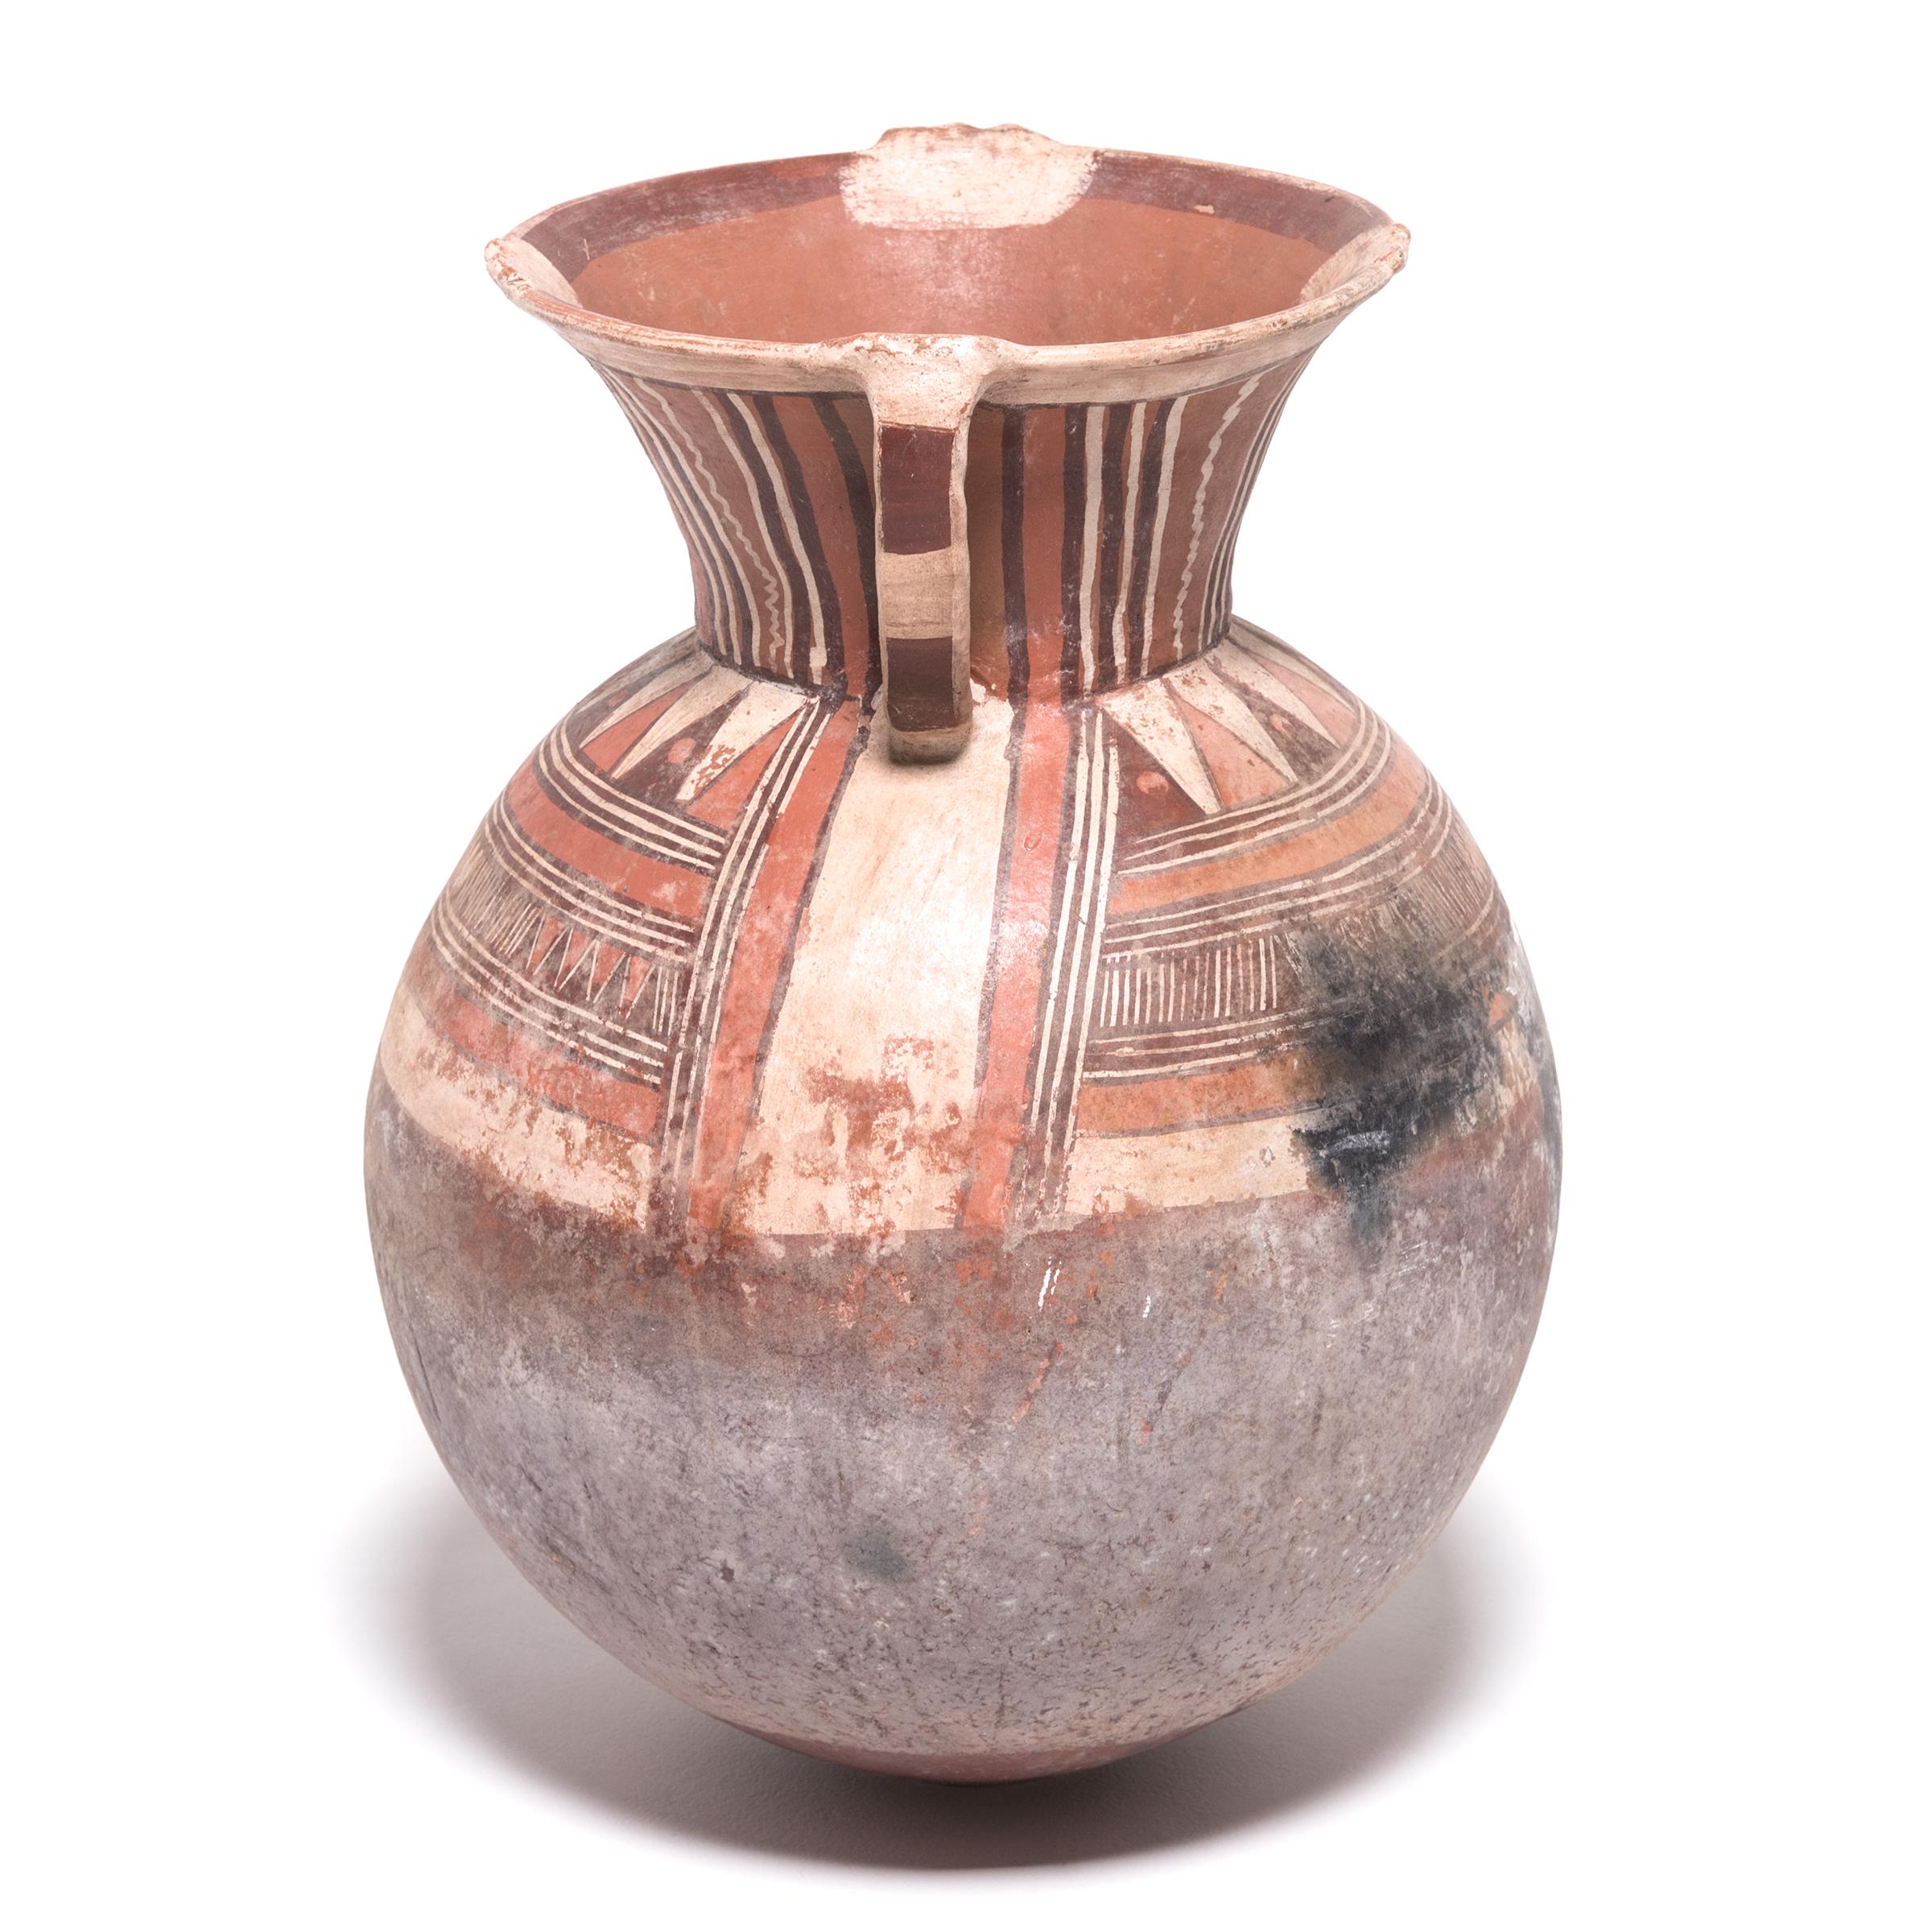 The Djerma people of Niger are well-known for their gracefully shaped and delicately painted water containers. The surface paintings are applied after firing with all natural pigments. The graphic, geometric designs closely relate to patterns that